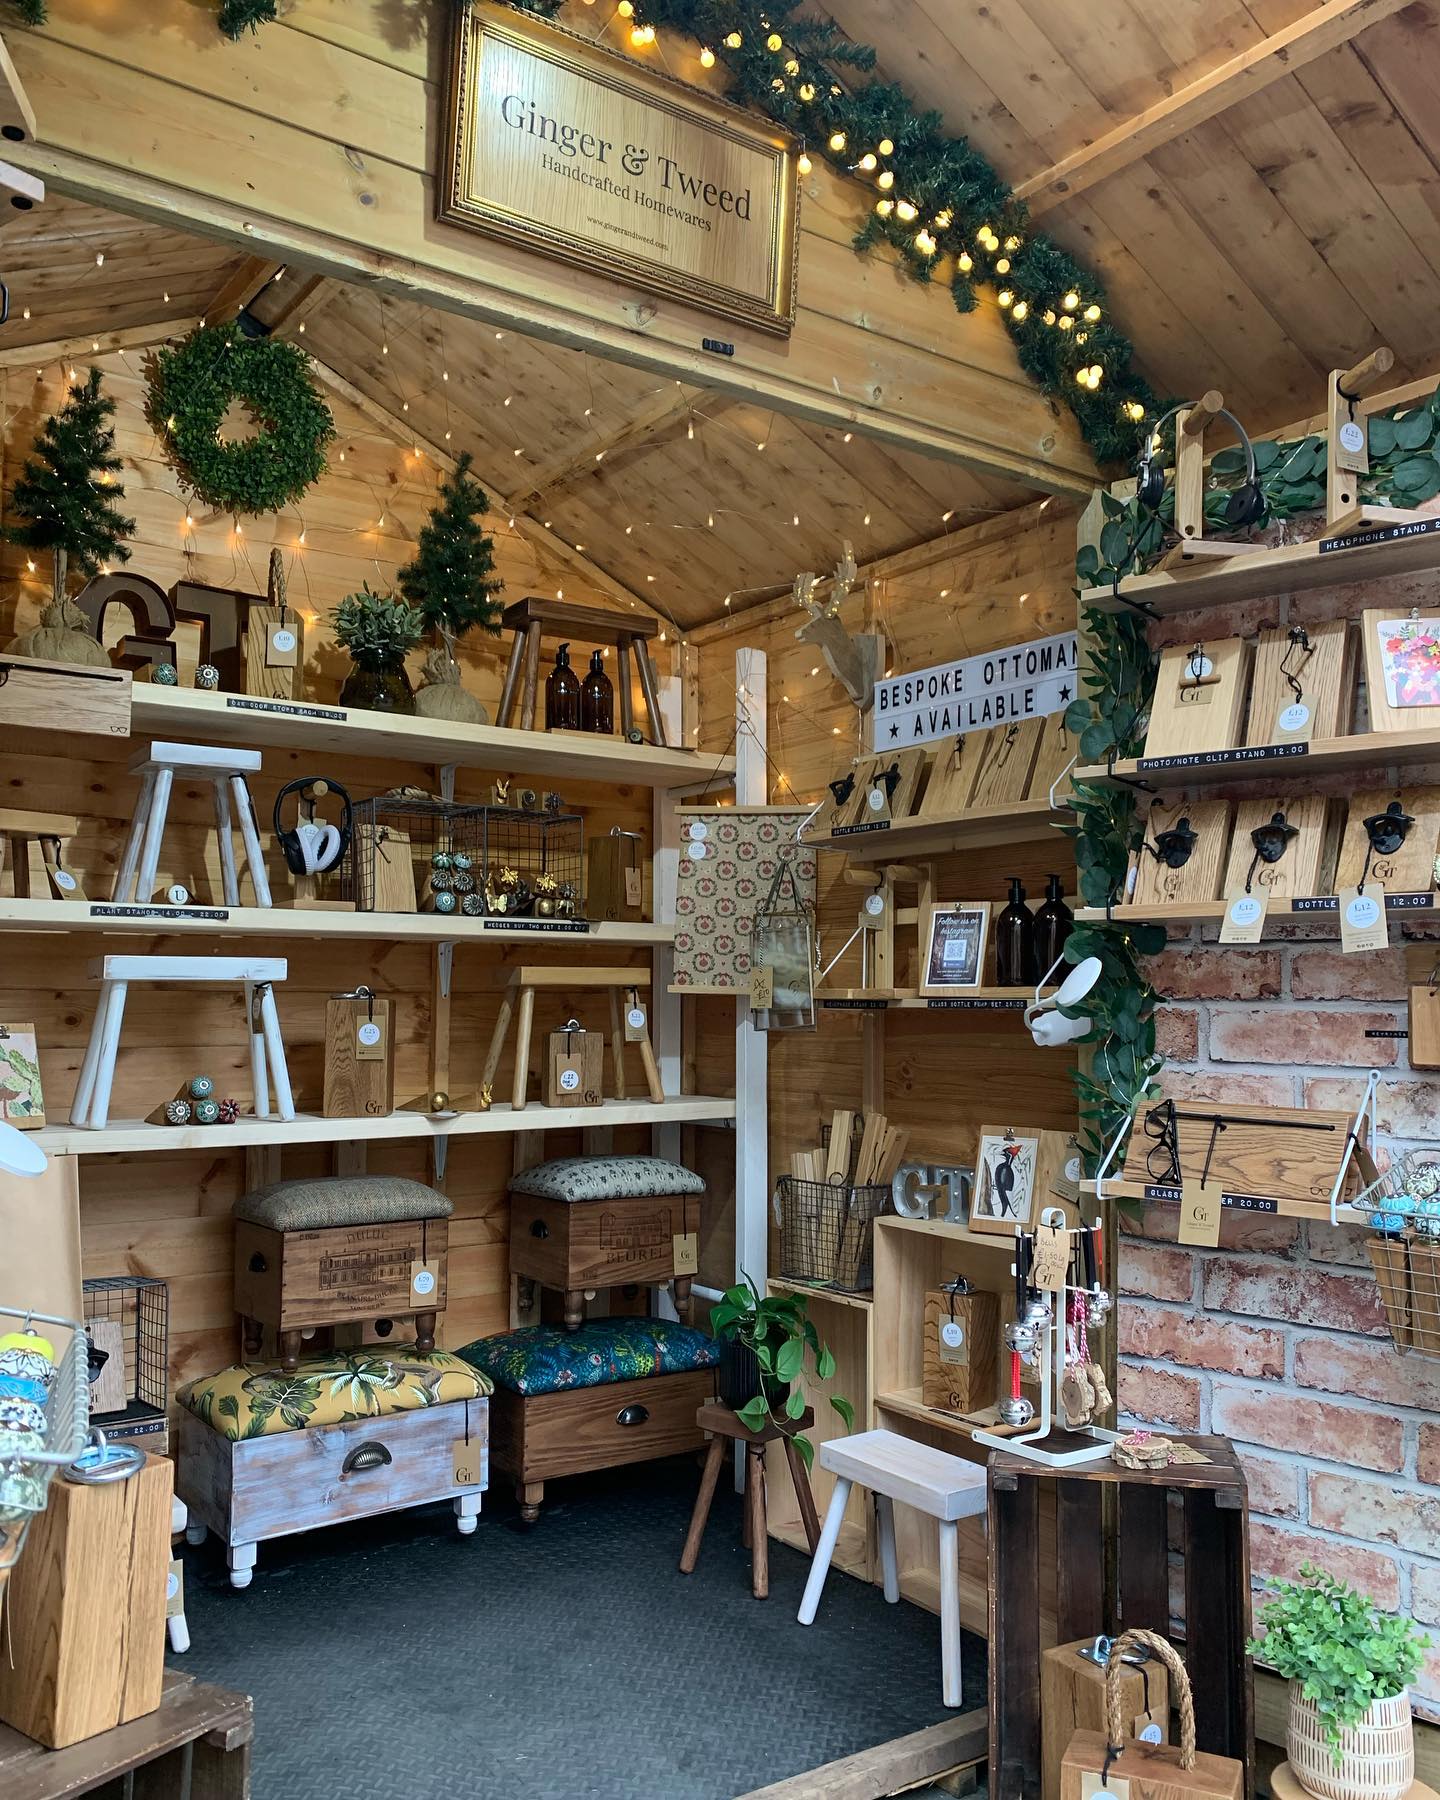 Day 4 in the Christmas chalet-Tweed gave Ginger the morning off to restock and recharge 🧡 and Bath is buzzing again with lovely people enjoying the festive vibes. Cant believe we are more than half way through our stay!! Looking forward to tomorrow- Wednesday!